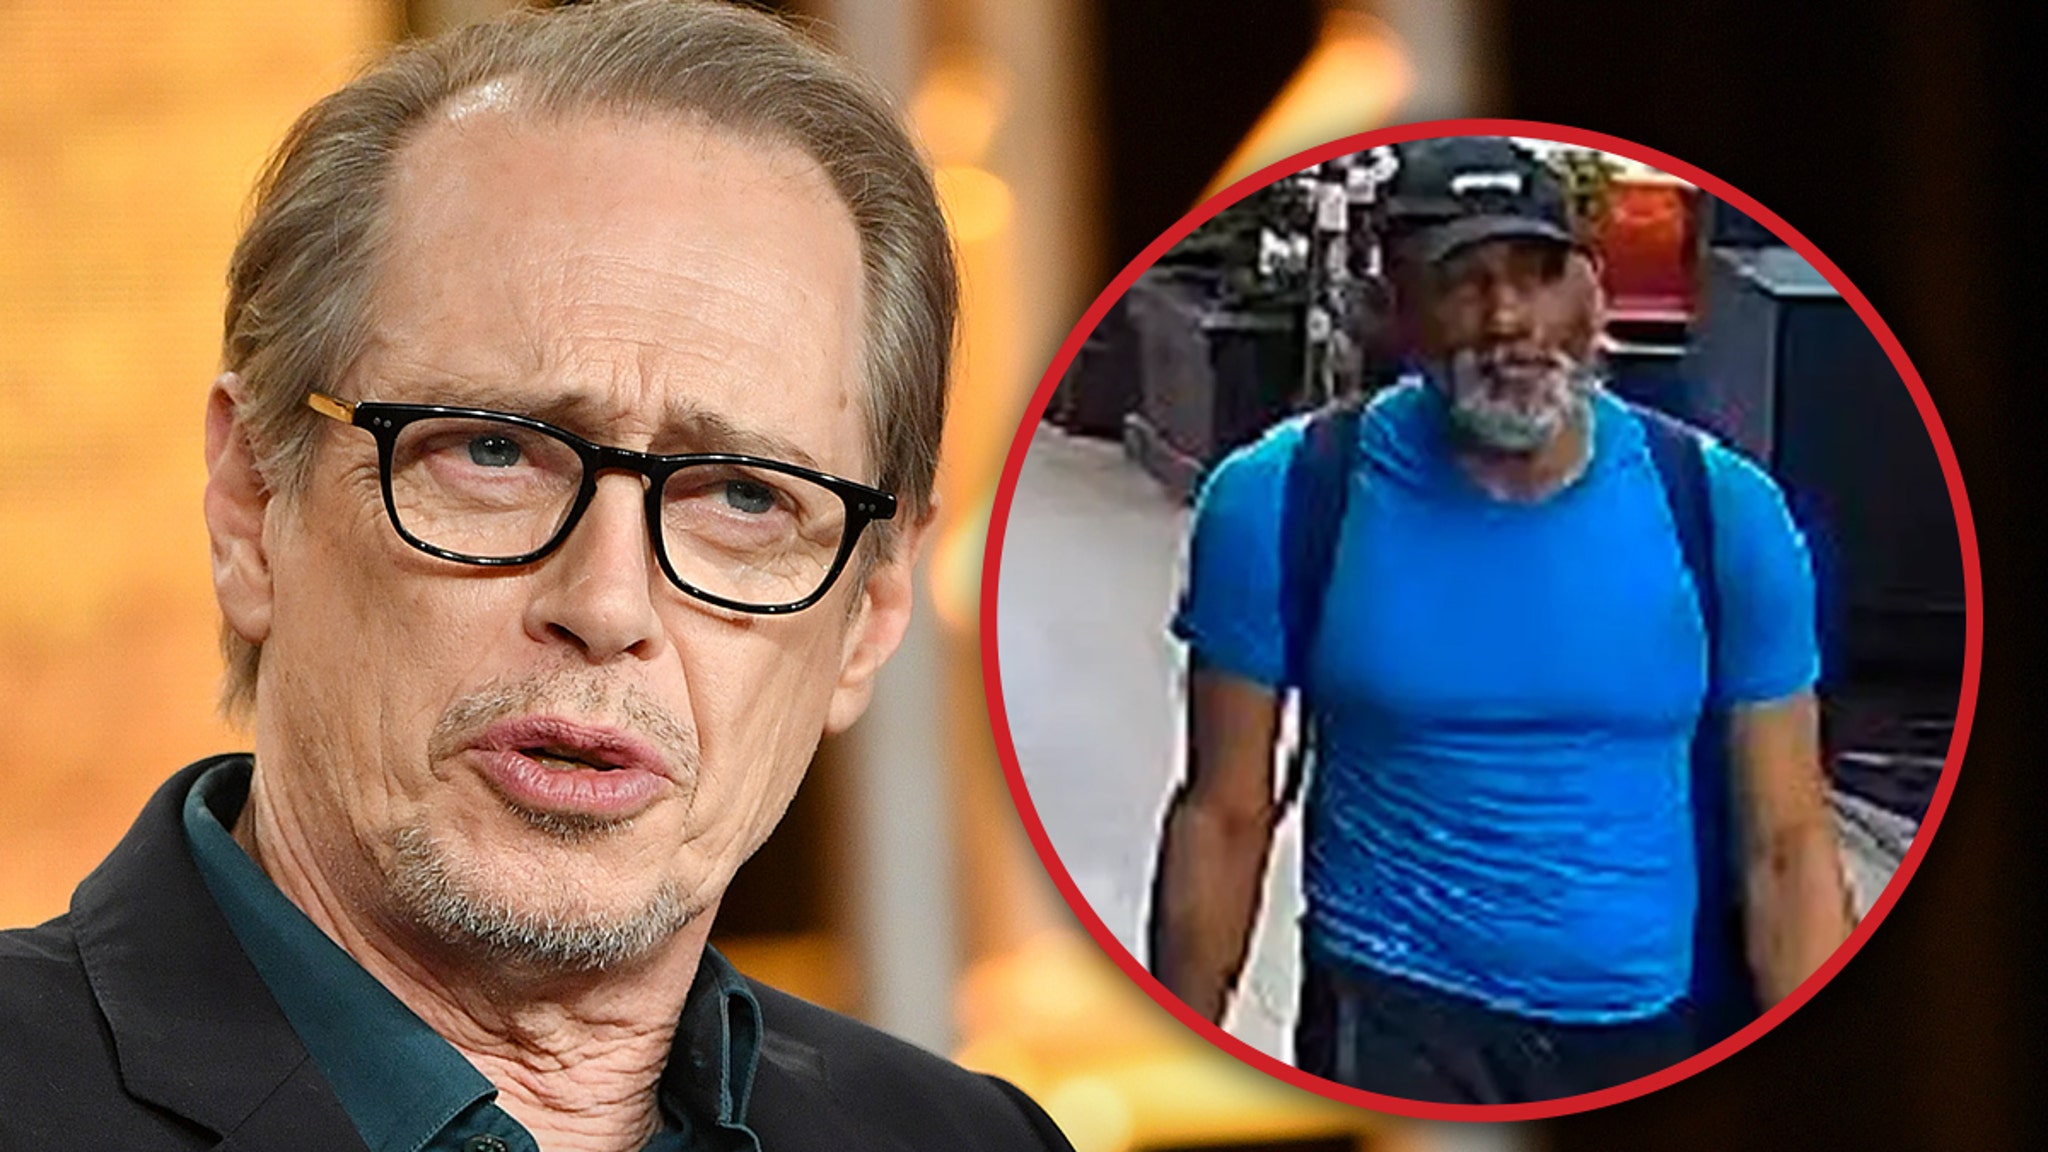 Steve Buscemi Captured on Video Moments Before NYC Attack